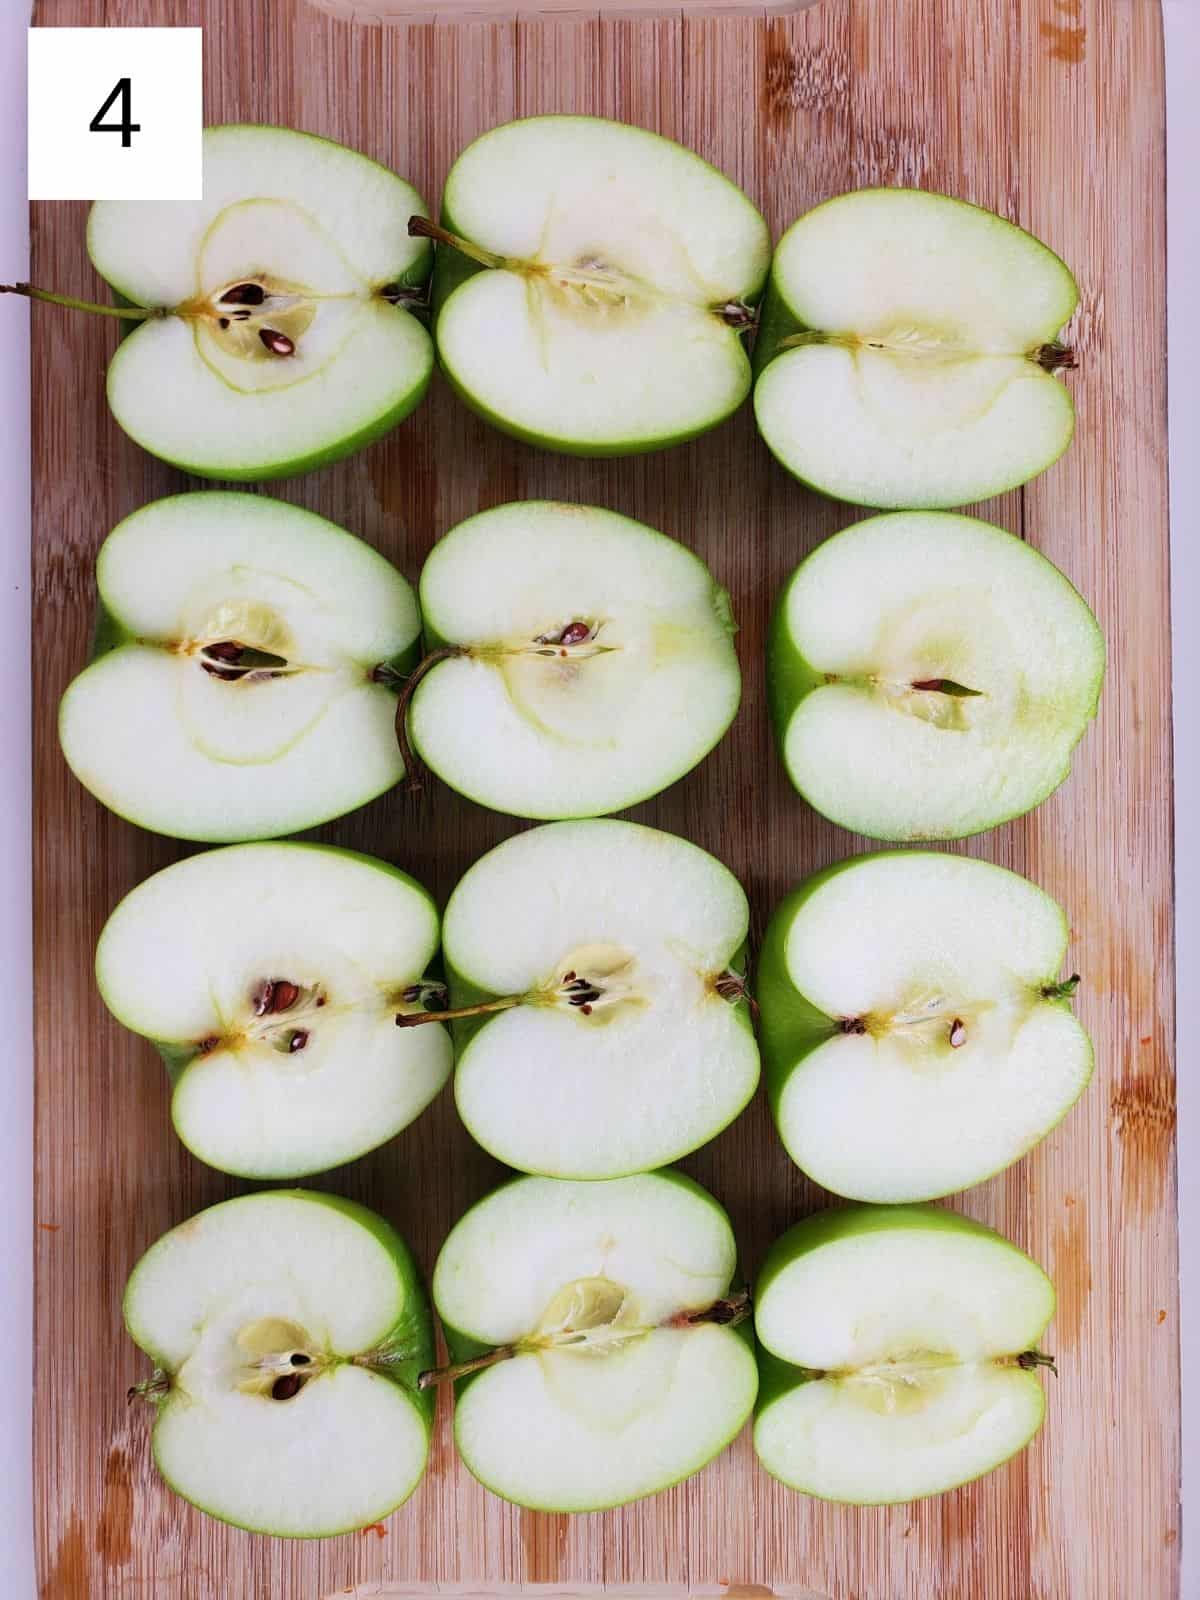 halves of apples on a wooden chopping board.